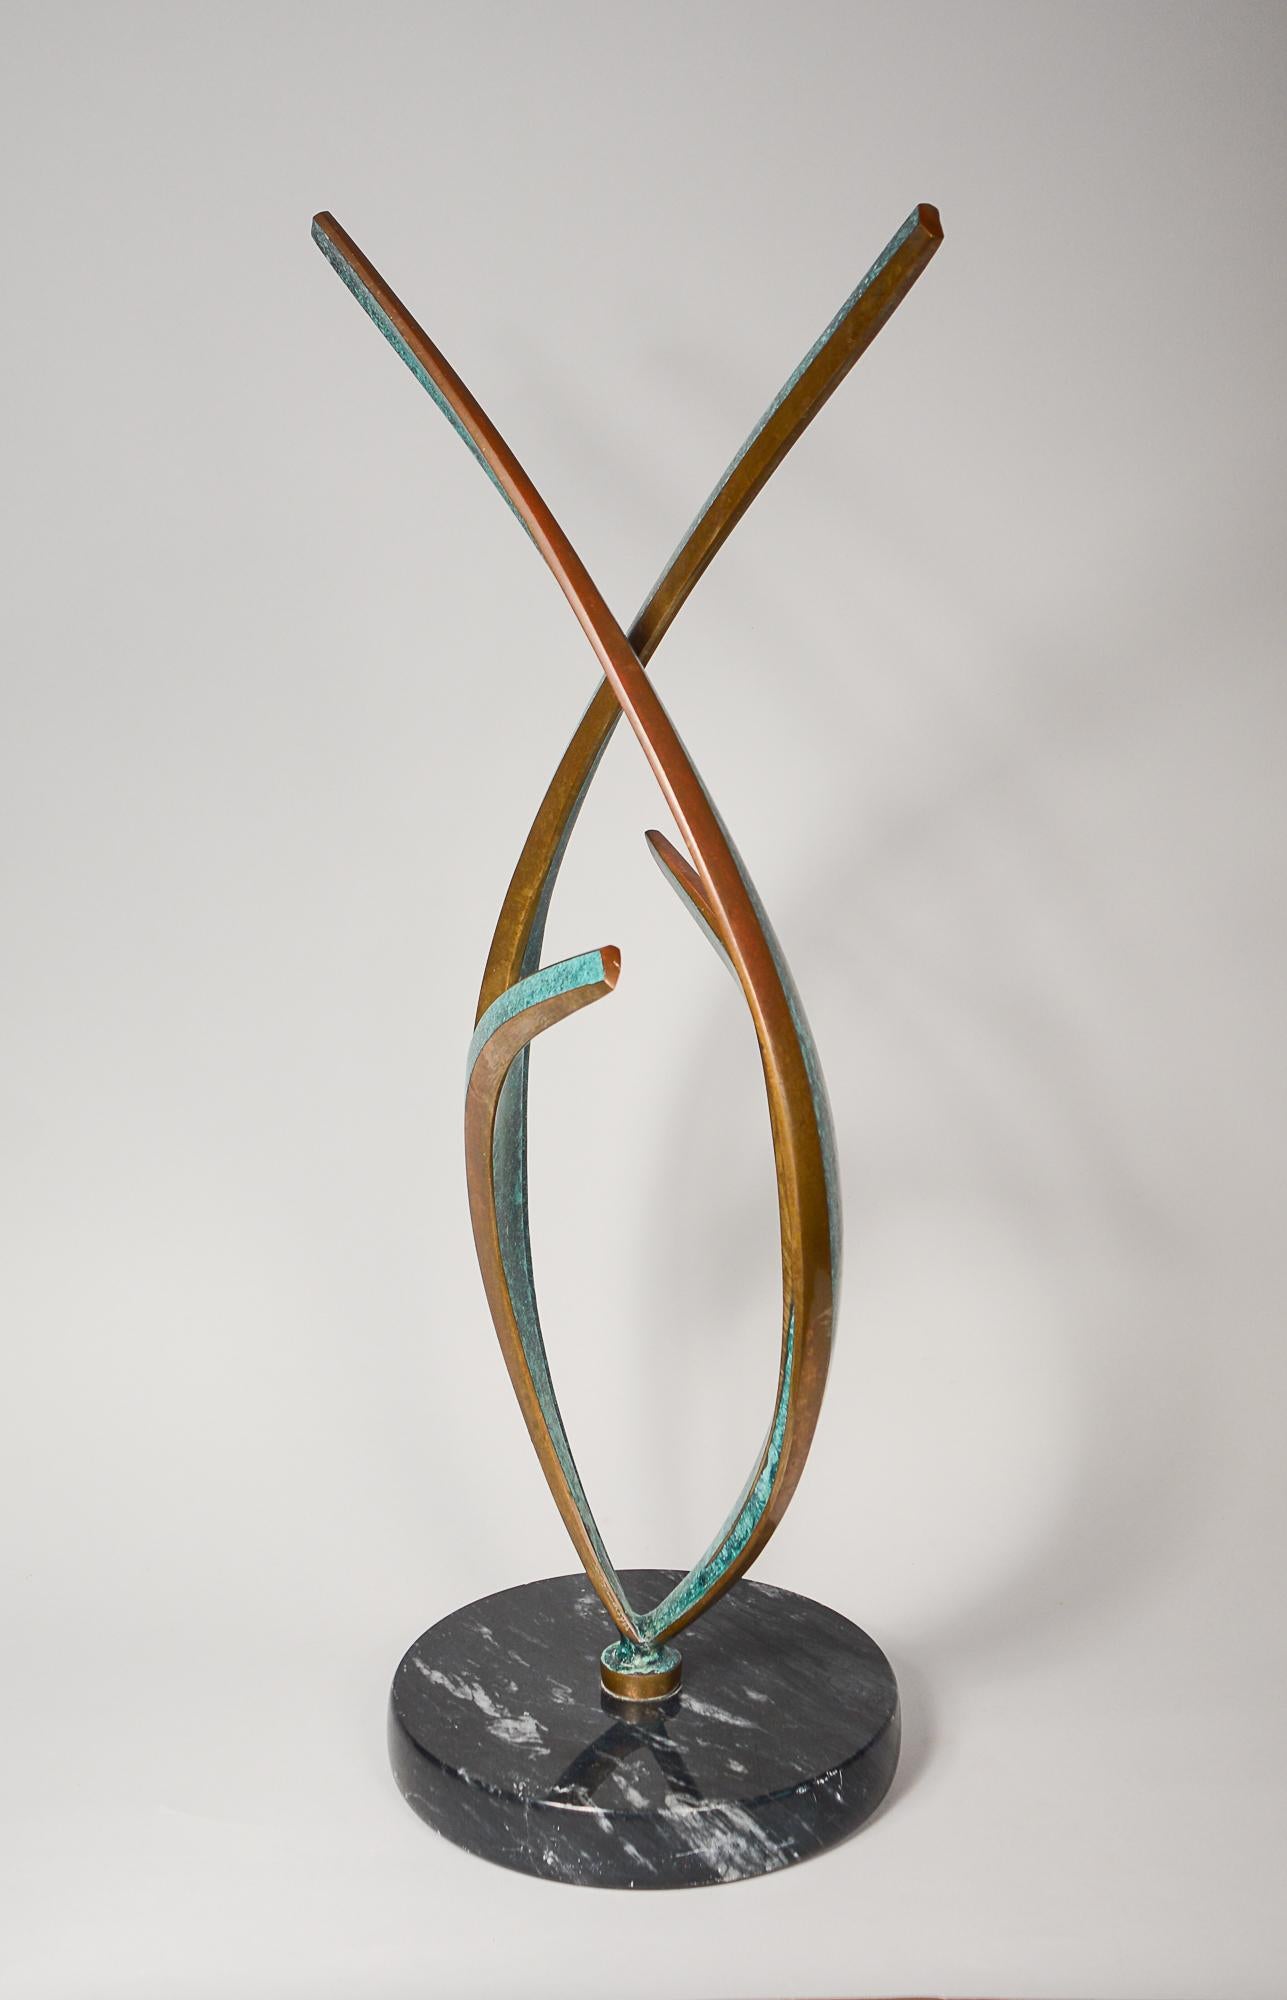 Large bronze sculpture by California artist Bob Bennett (1939-2003). The bronze has a vibrant turquoise patination with polished bronze edges. 